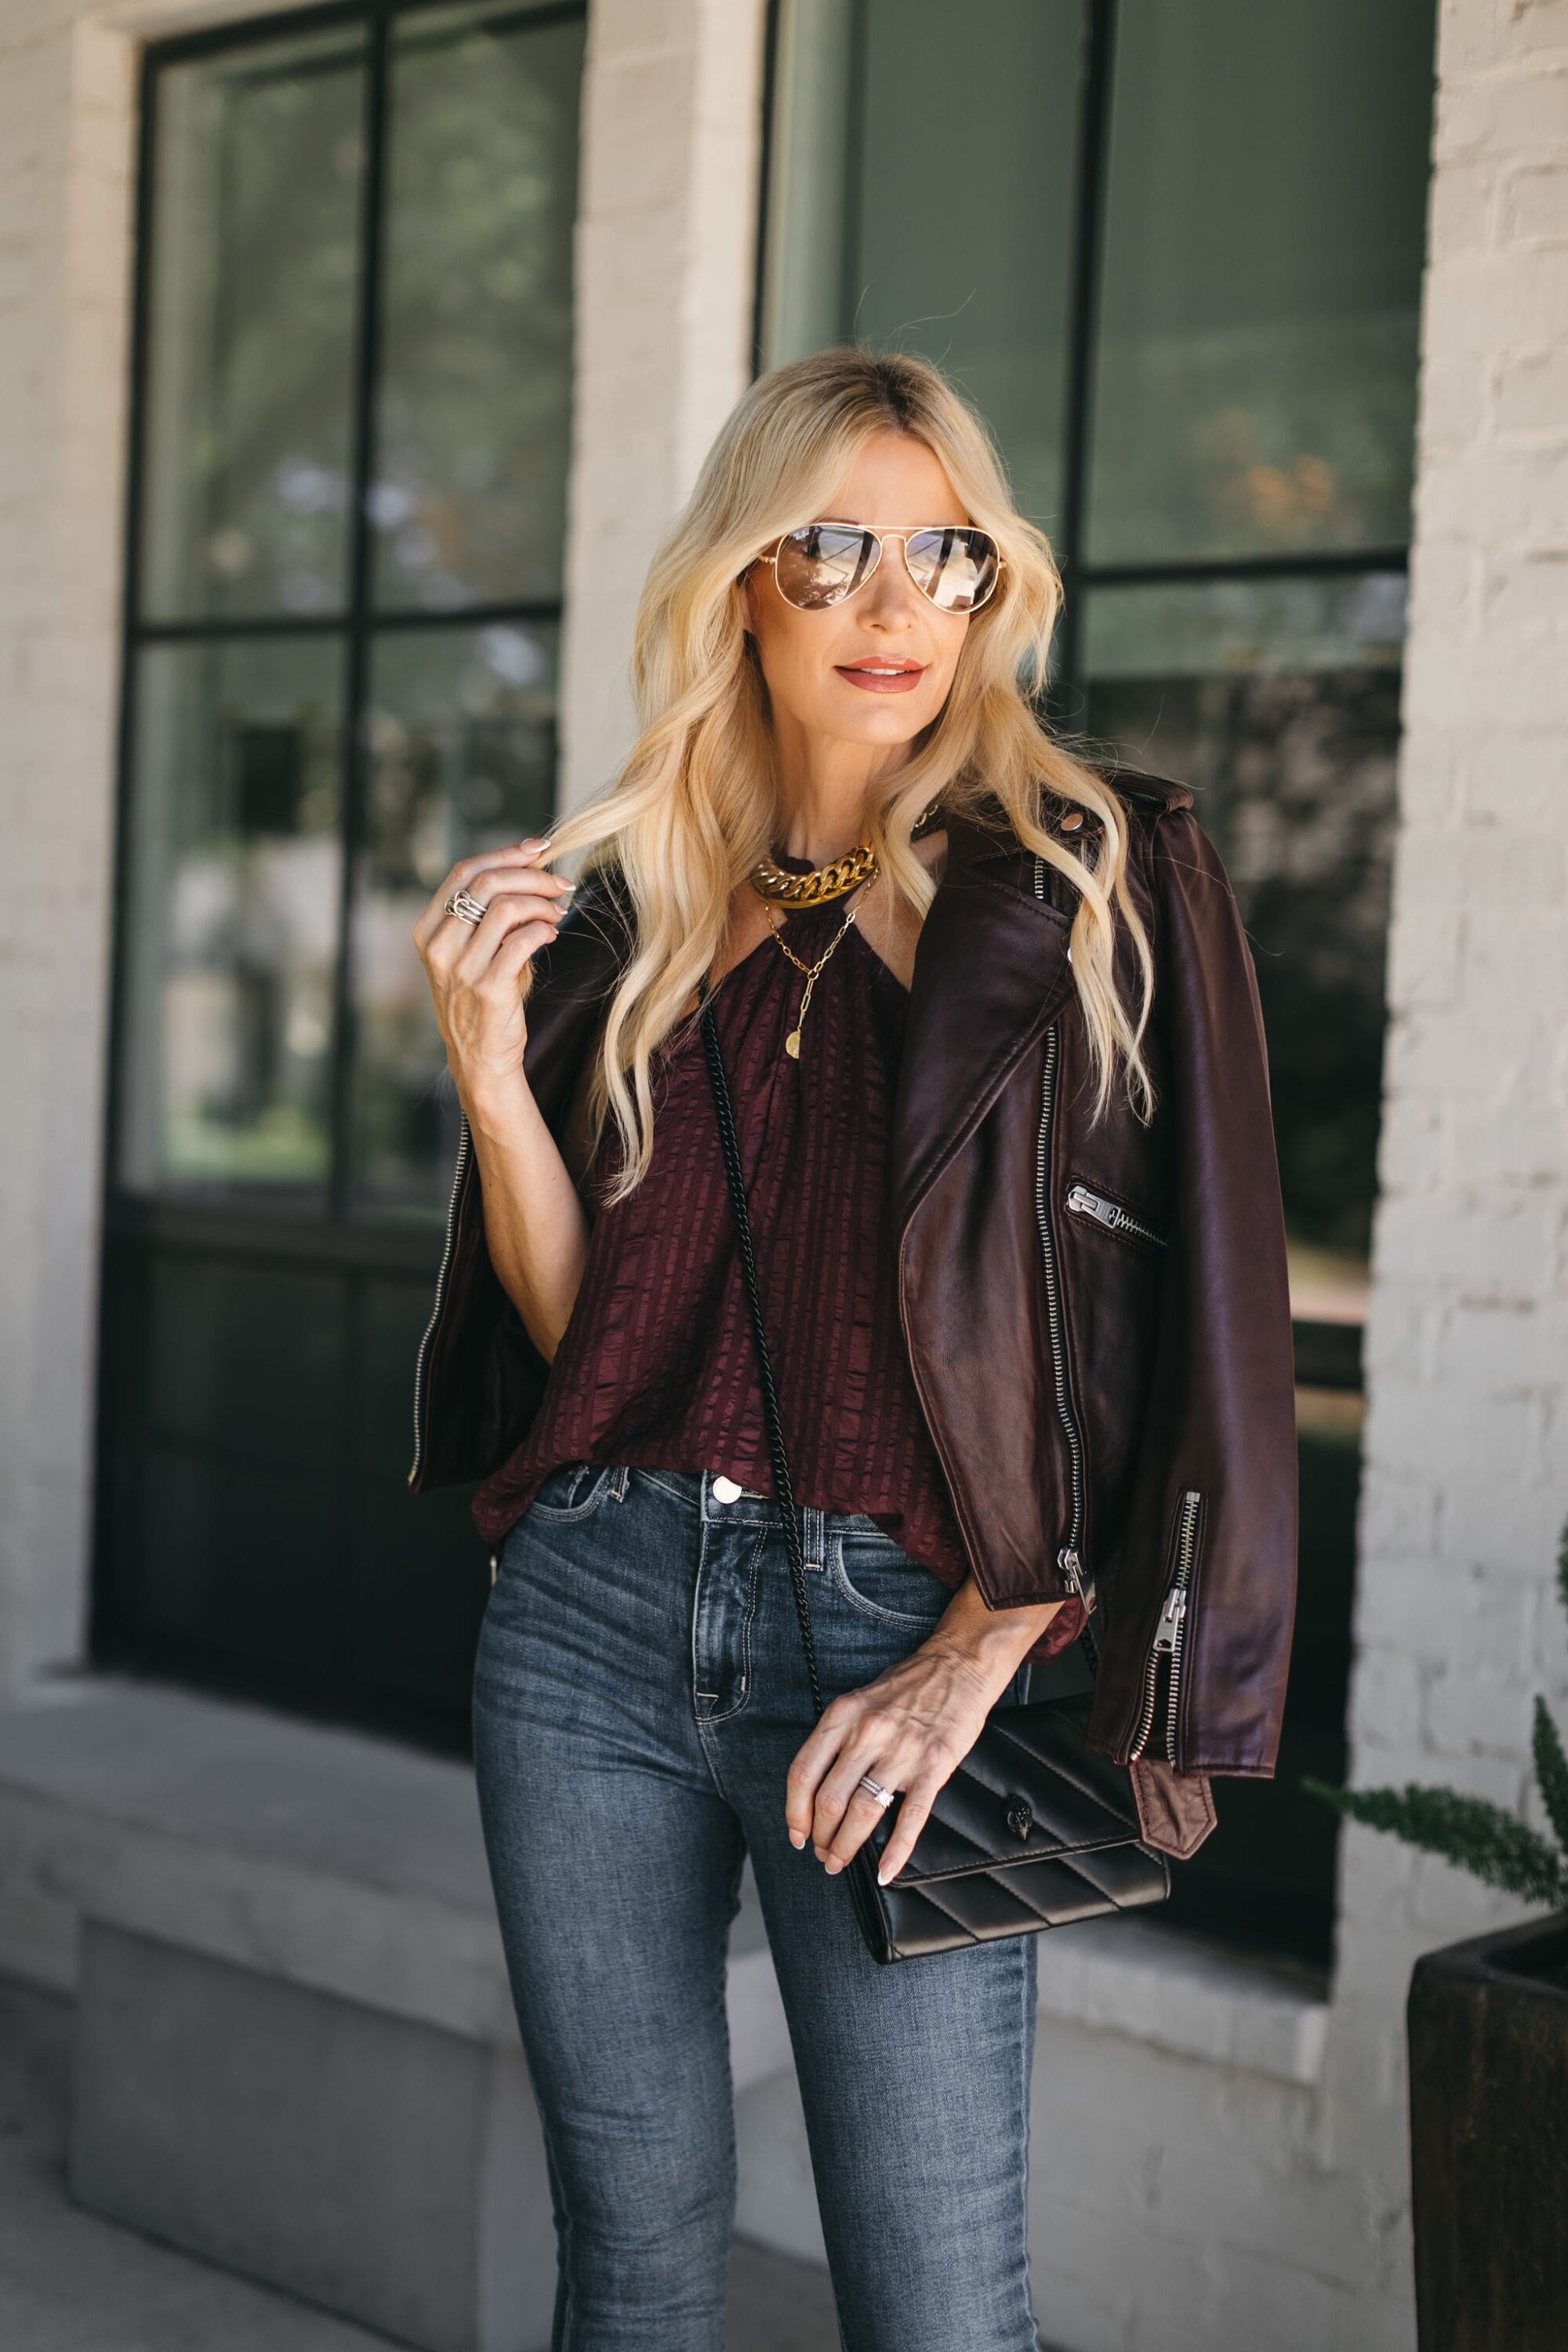 Dallas fashion blogger wearing all saints leather jacket, drape top and medium wash jeans.